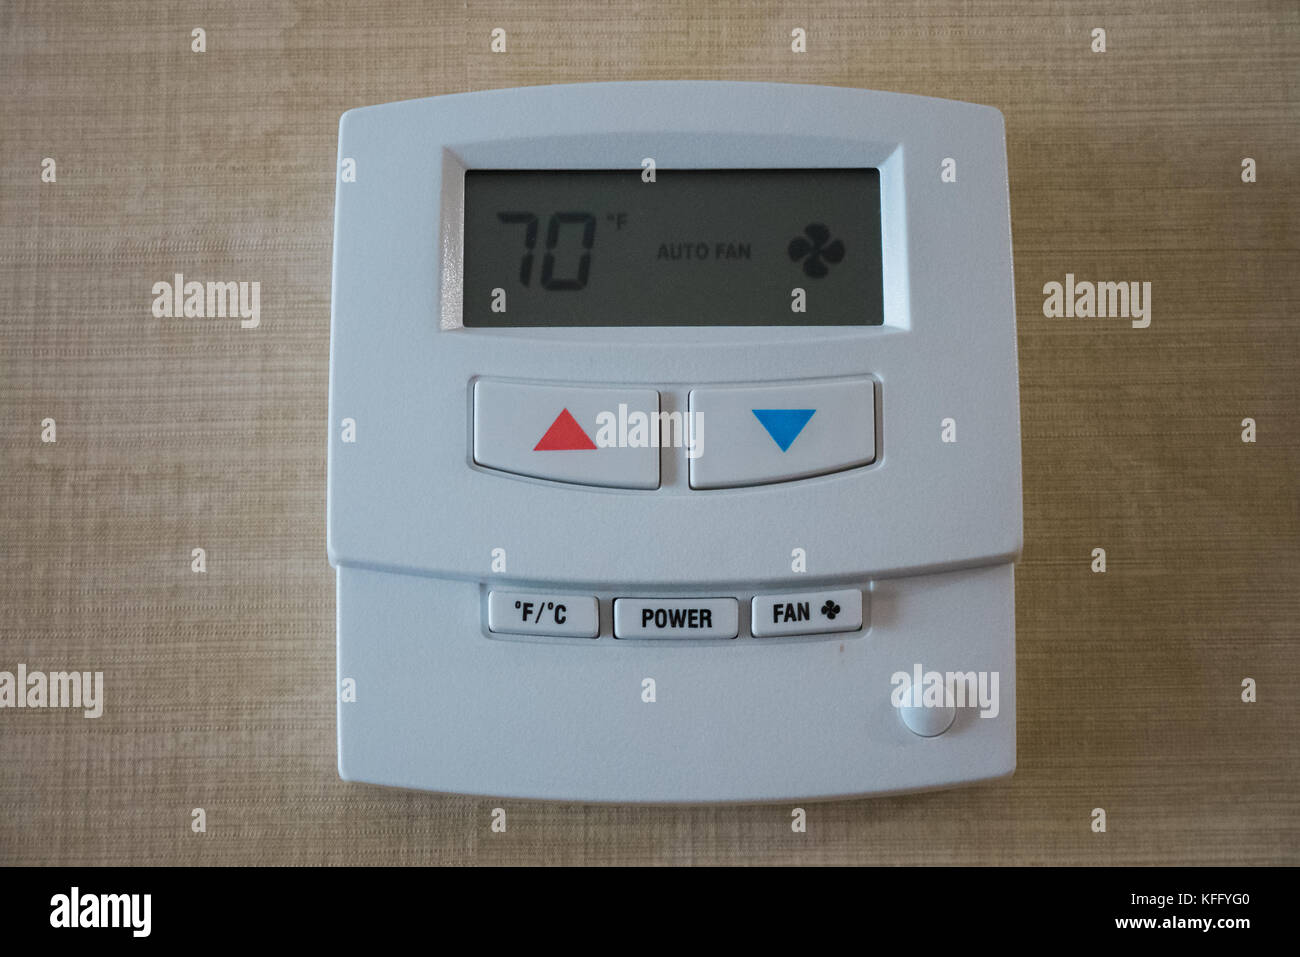 Thermostat in a hotel room Stock Photo - Alamy